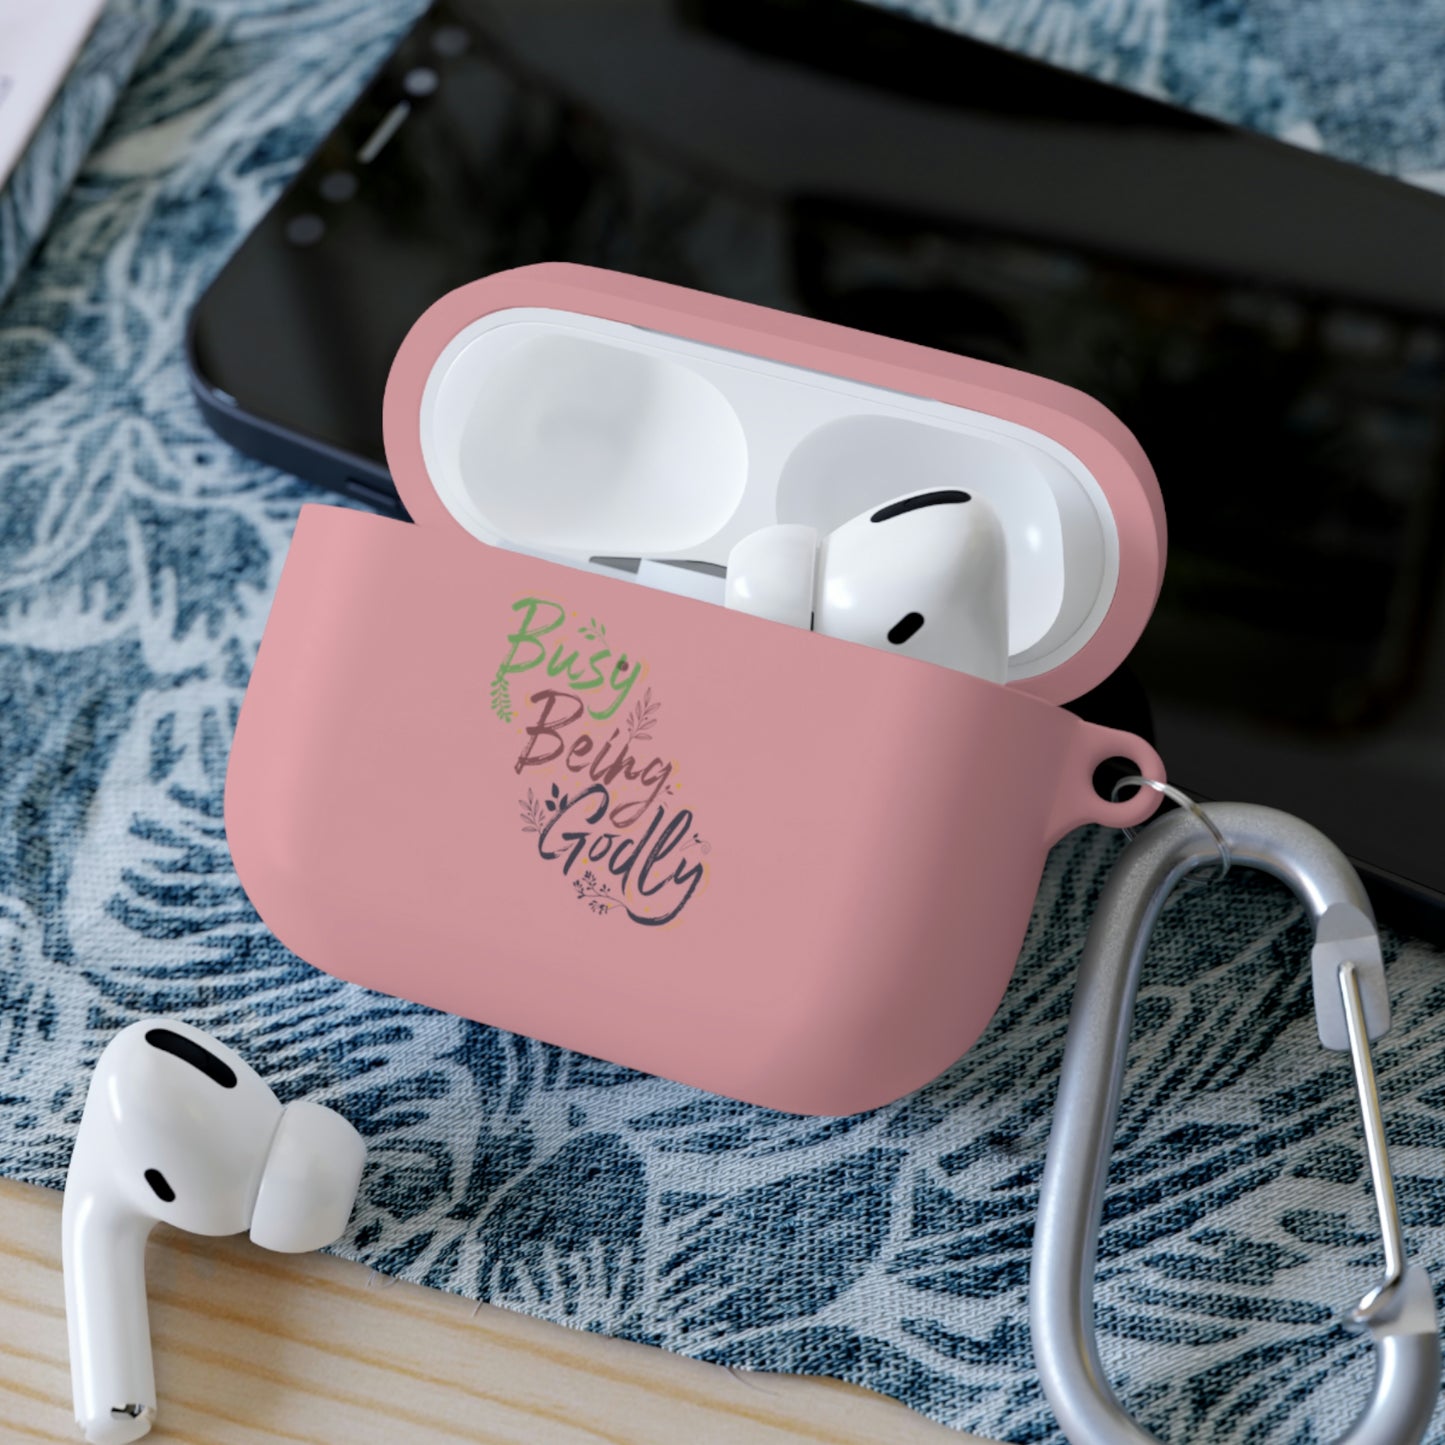 Busy Being Godly Airpods / Airpods Pro Case cover